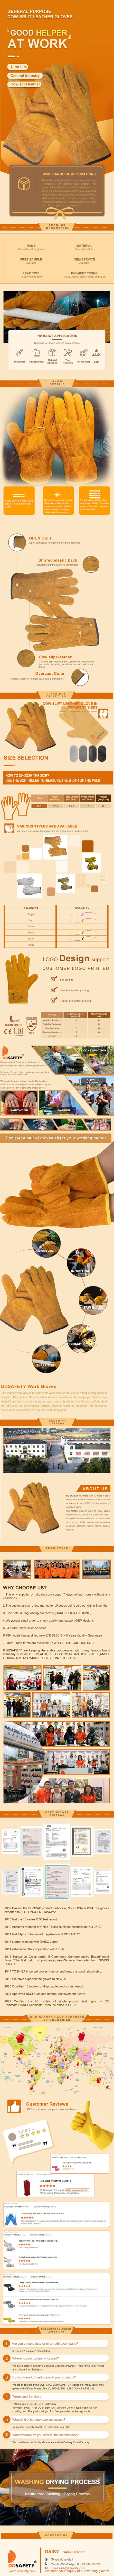 Unlined Cowhide Split Leather Work and Driving Gloves - DLD312 Unlined Cowhide Split Leather Work and Driving Gloves - DLD312 Cowhide Split Leather WorkGloves,Cowhide Split Leather Gloves,Cowhide Split Leather Driving Gloves